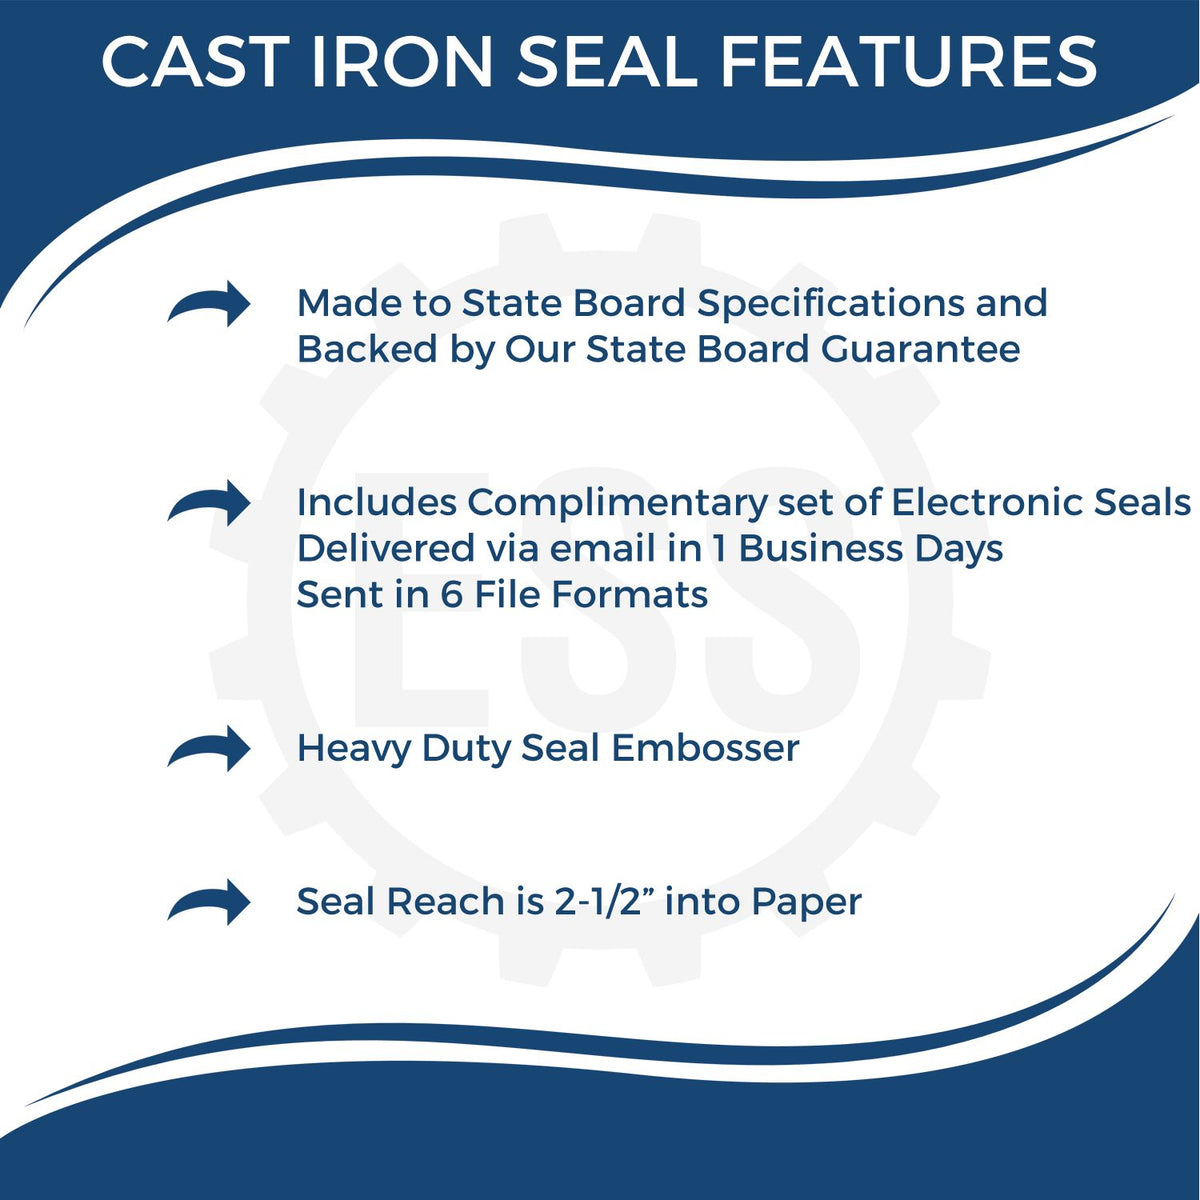 A picture of an infographic highlighting the selling points for the Heavy Duty Cast Iron Massachusetts Geologist Seal Embosser